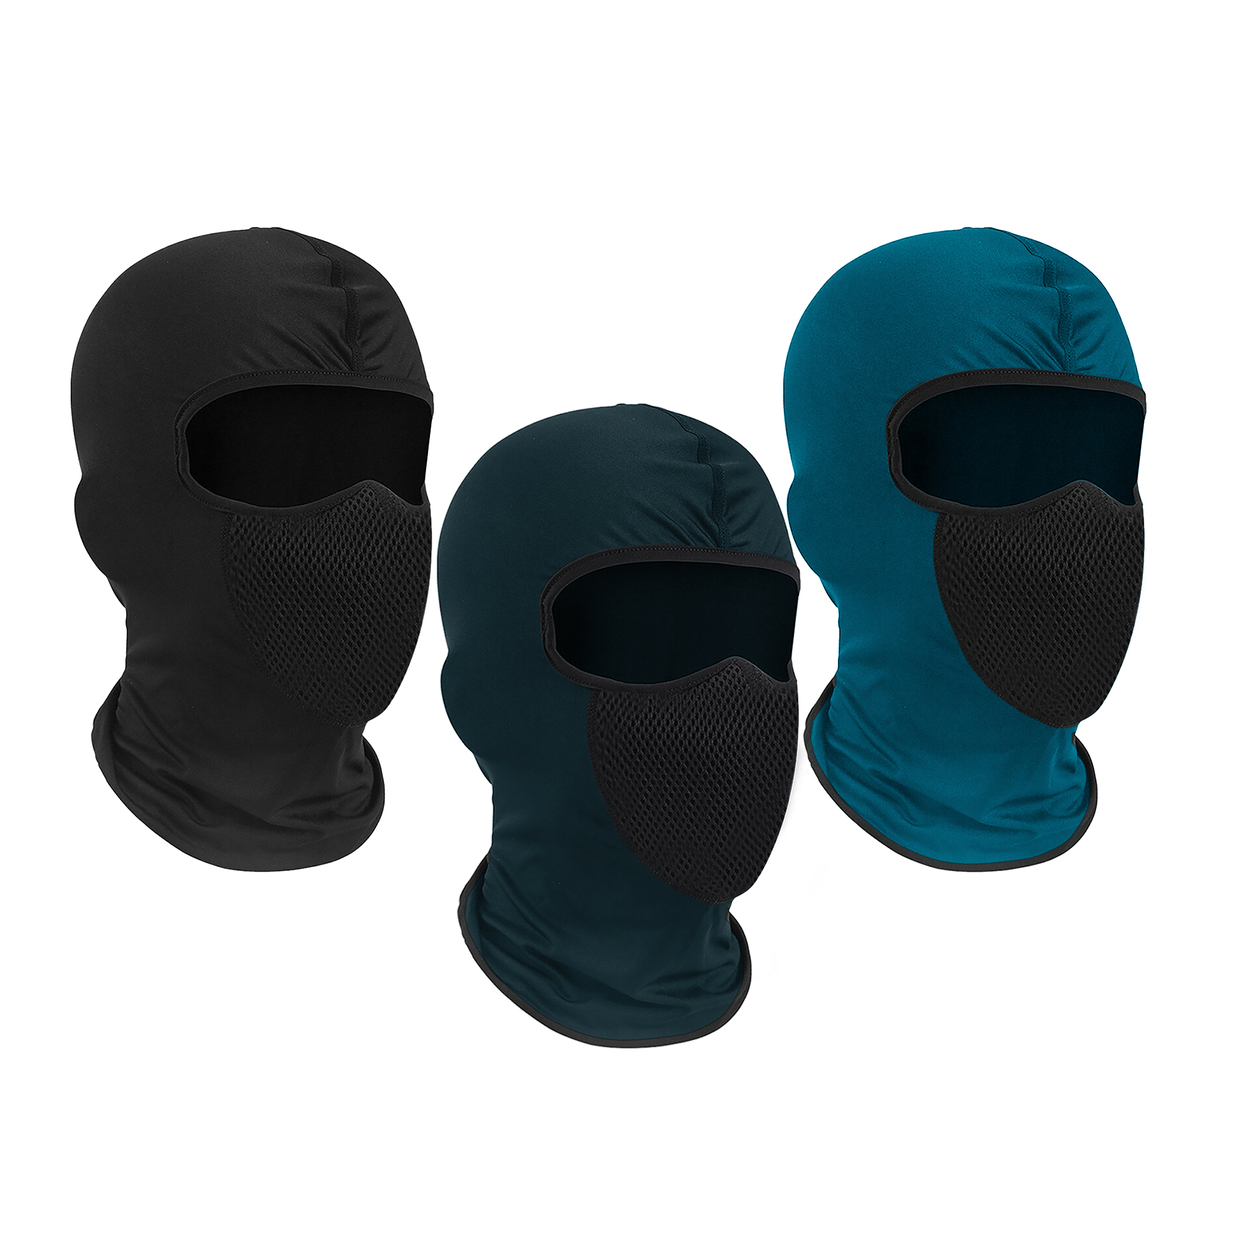 Men's Warm Winter Windproof Breathable Cozy Thermal Balaclava Winter Ski Full Face Mask - Navy